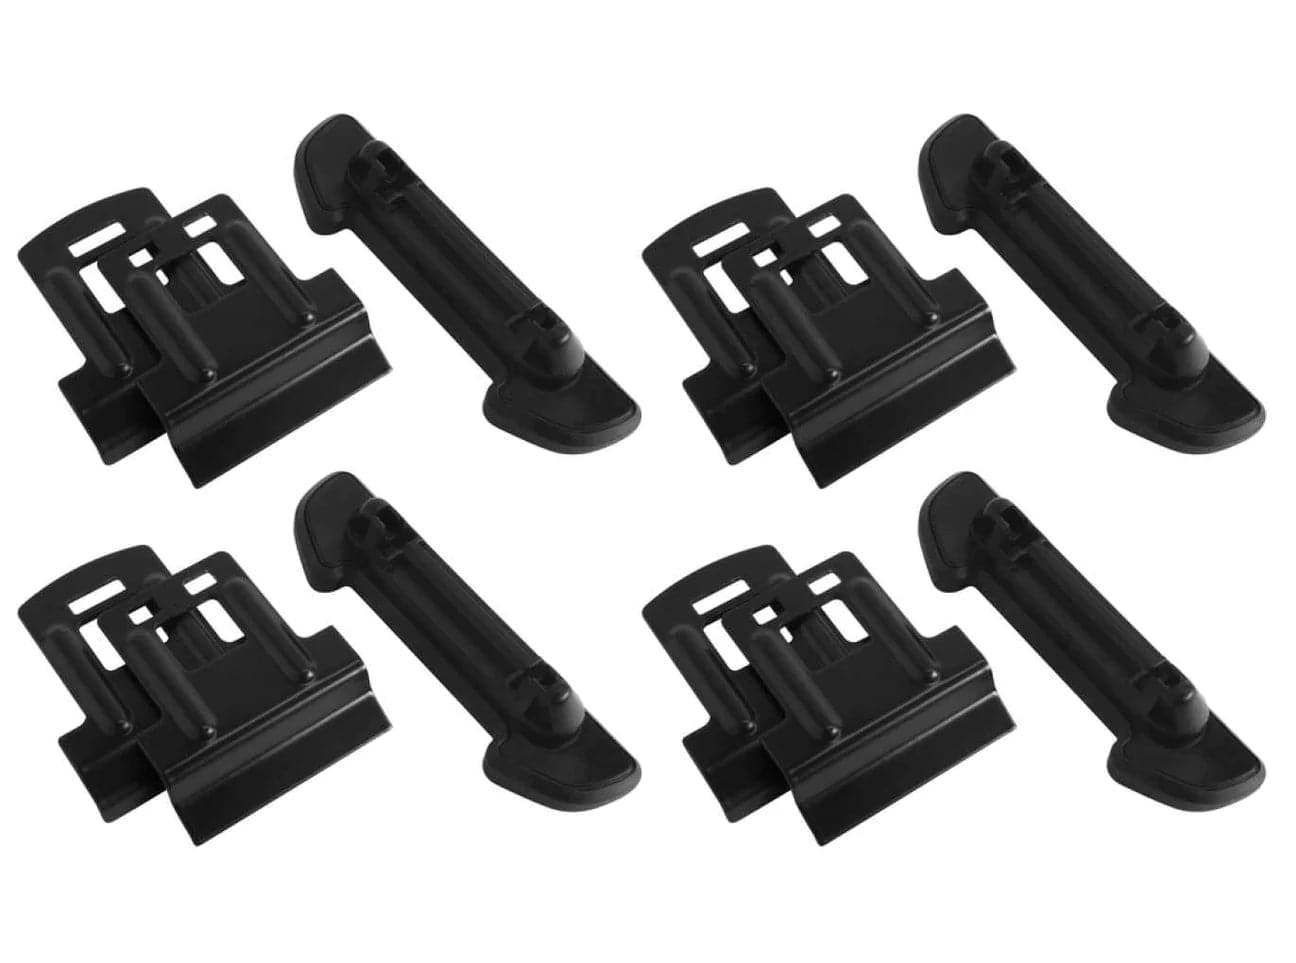 A set of four Yakima Ridge Clip handles on a white background.